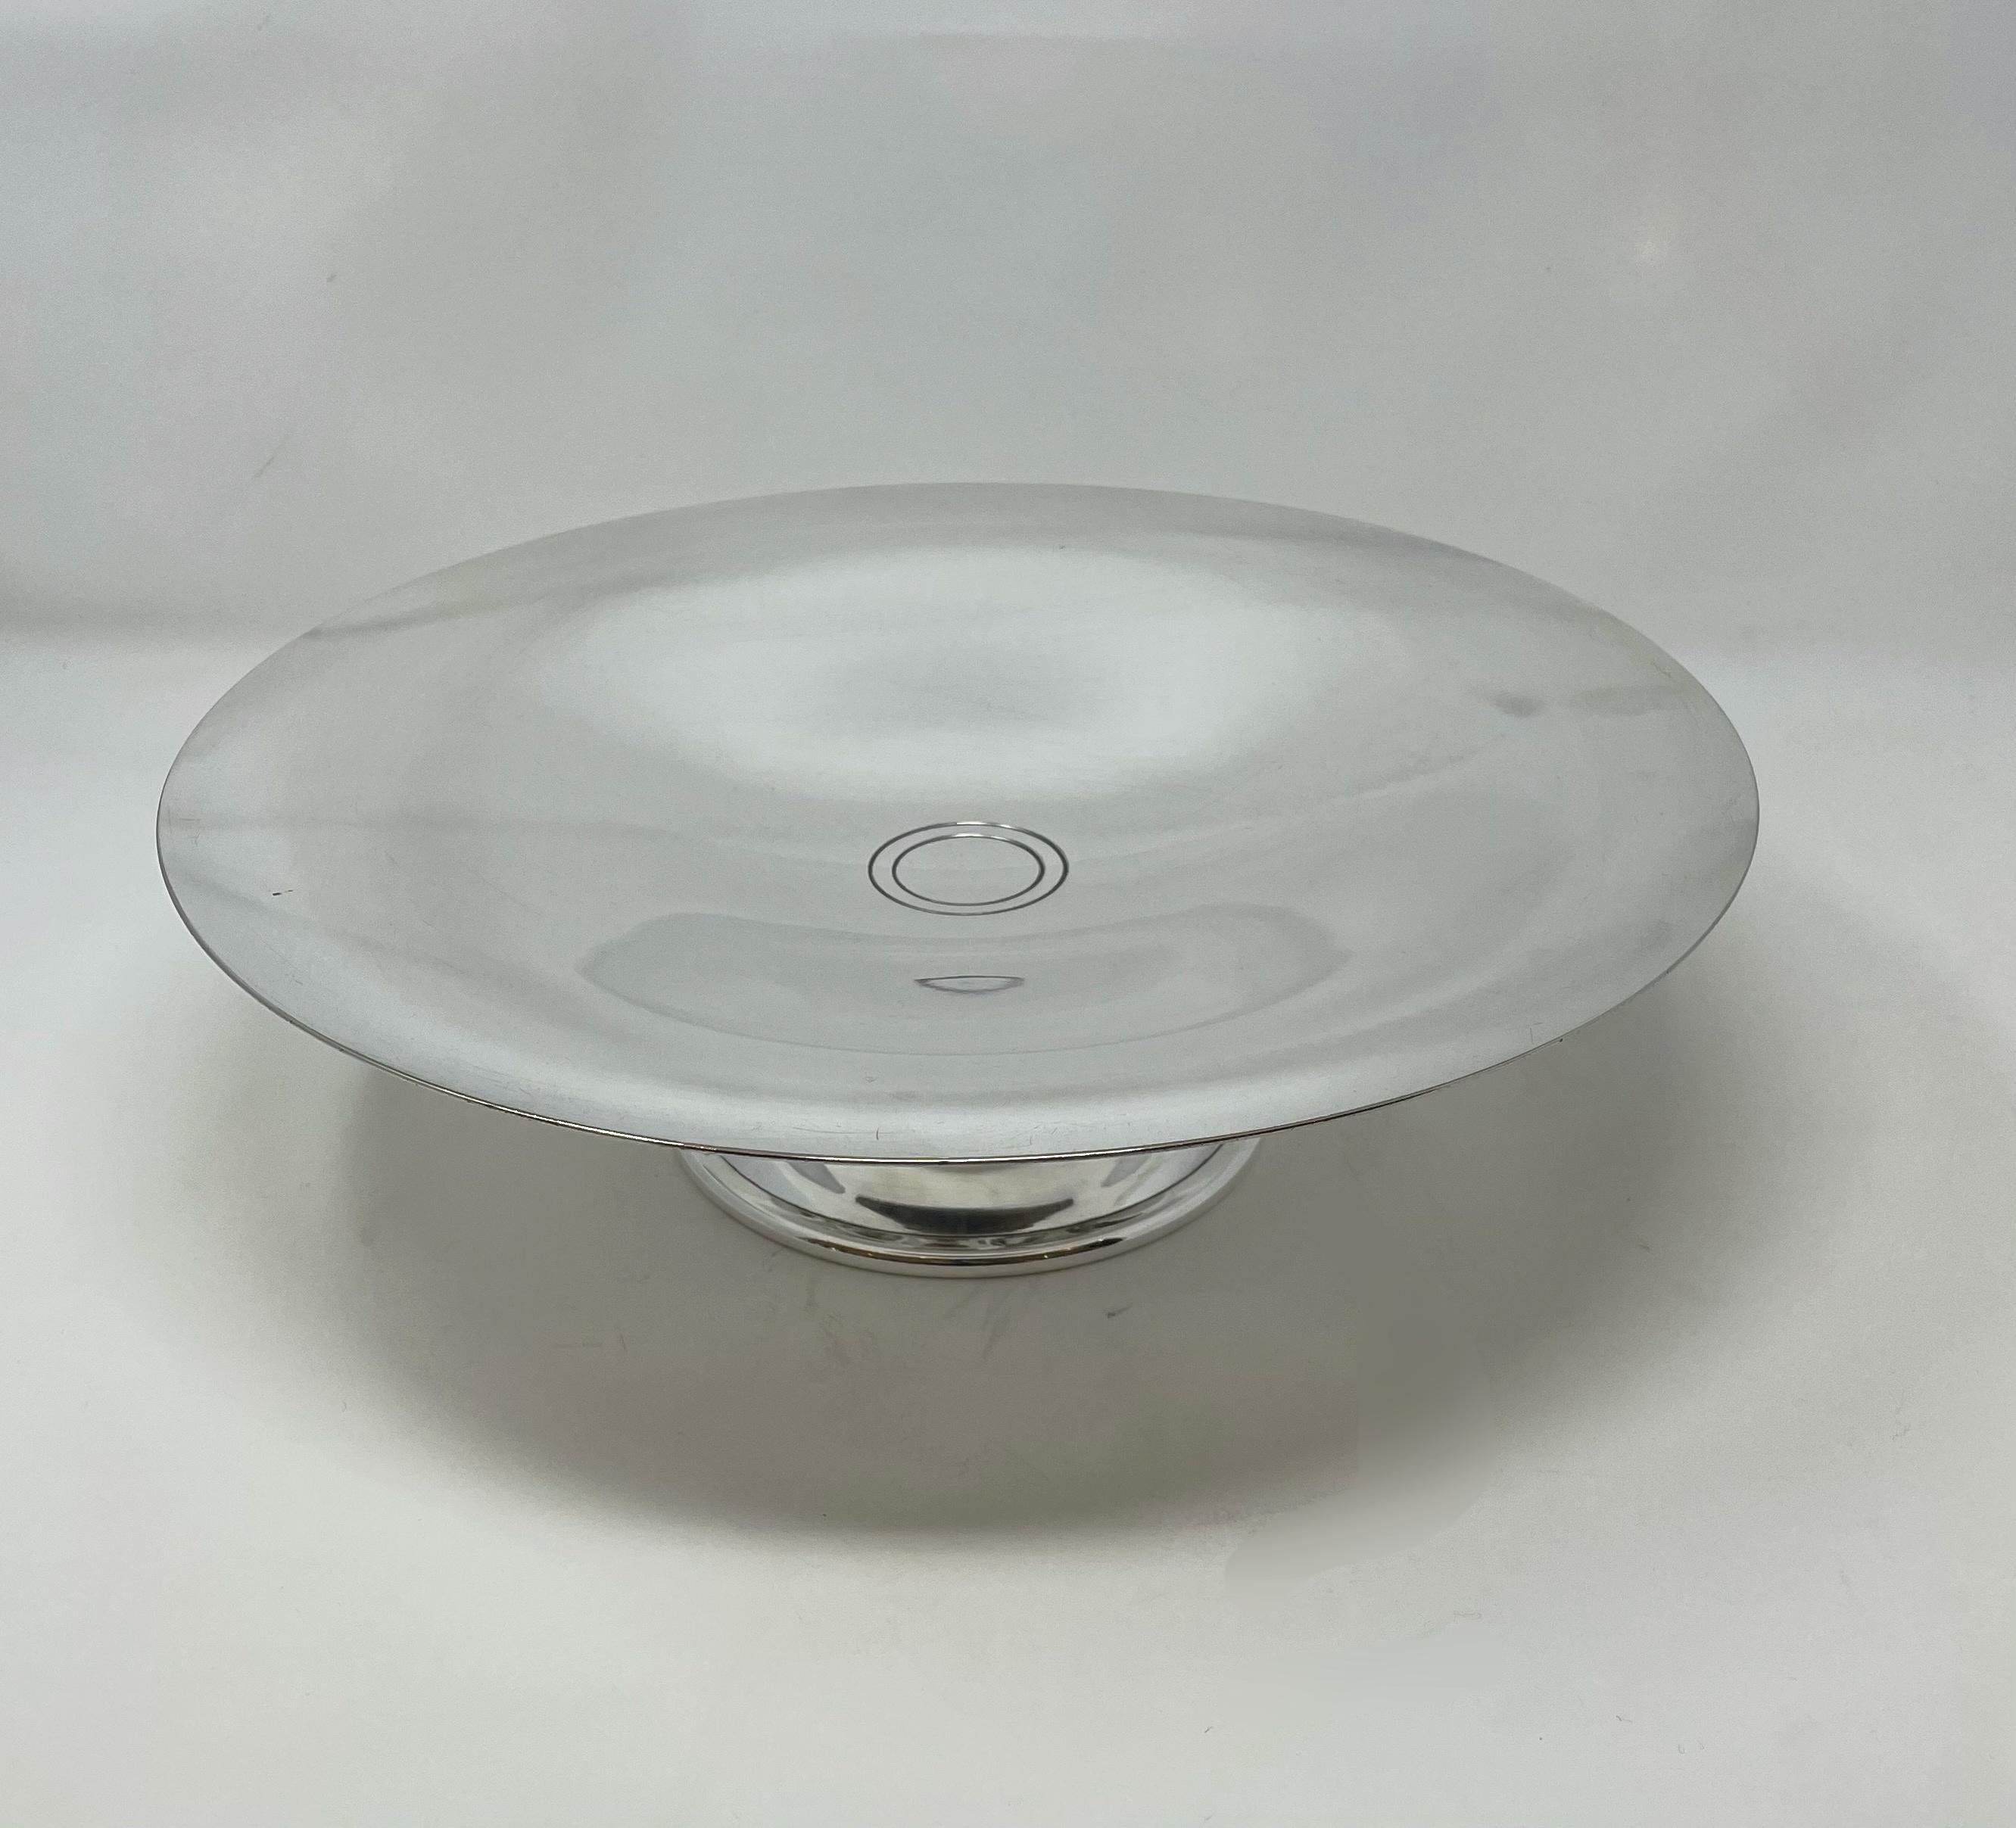 Art Deco bowl by Luc Lanel for Christofle, designed for the Normandie, 1930s.
Art Deco bowl designed for the dining room of the first classes of the Normandie Ship.